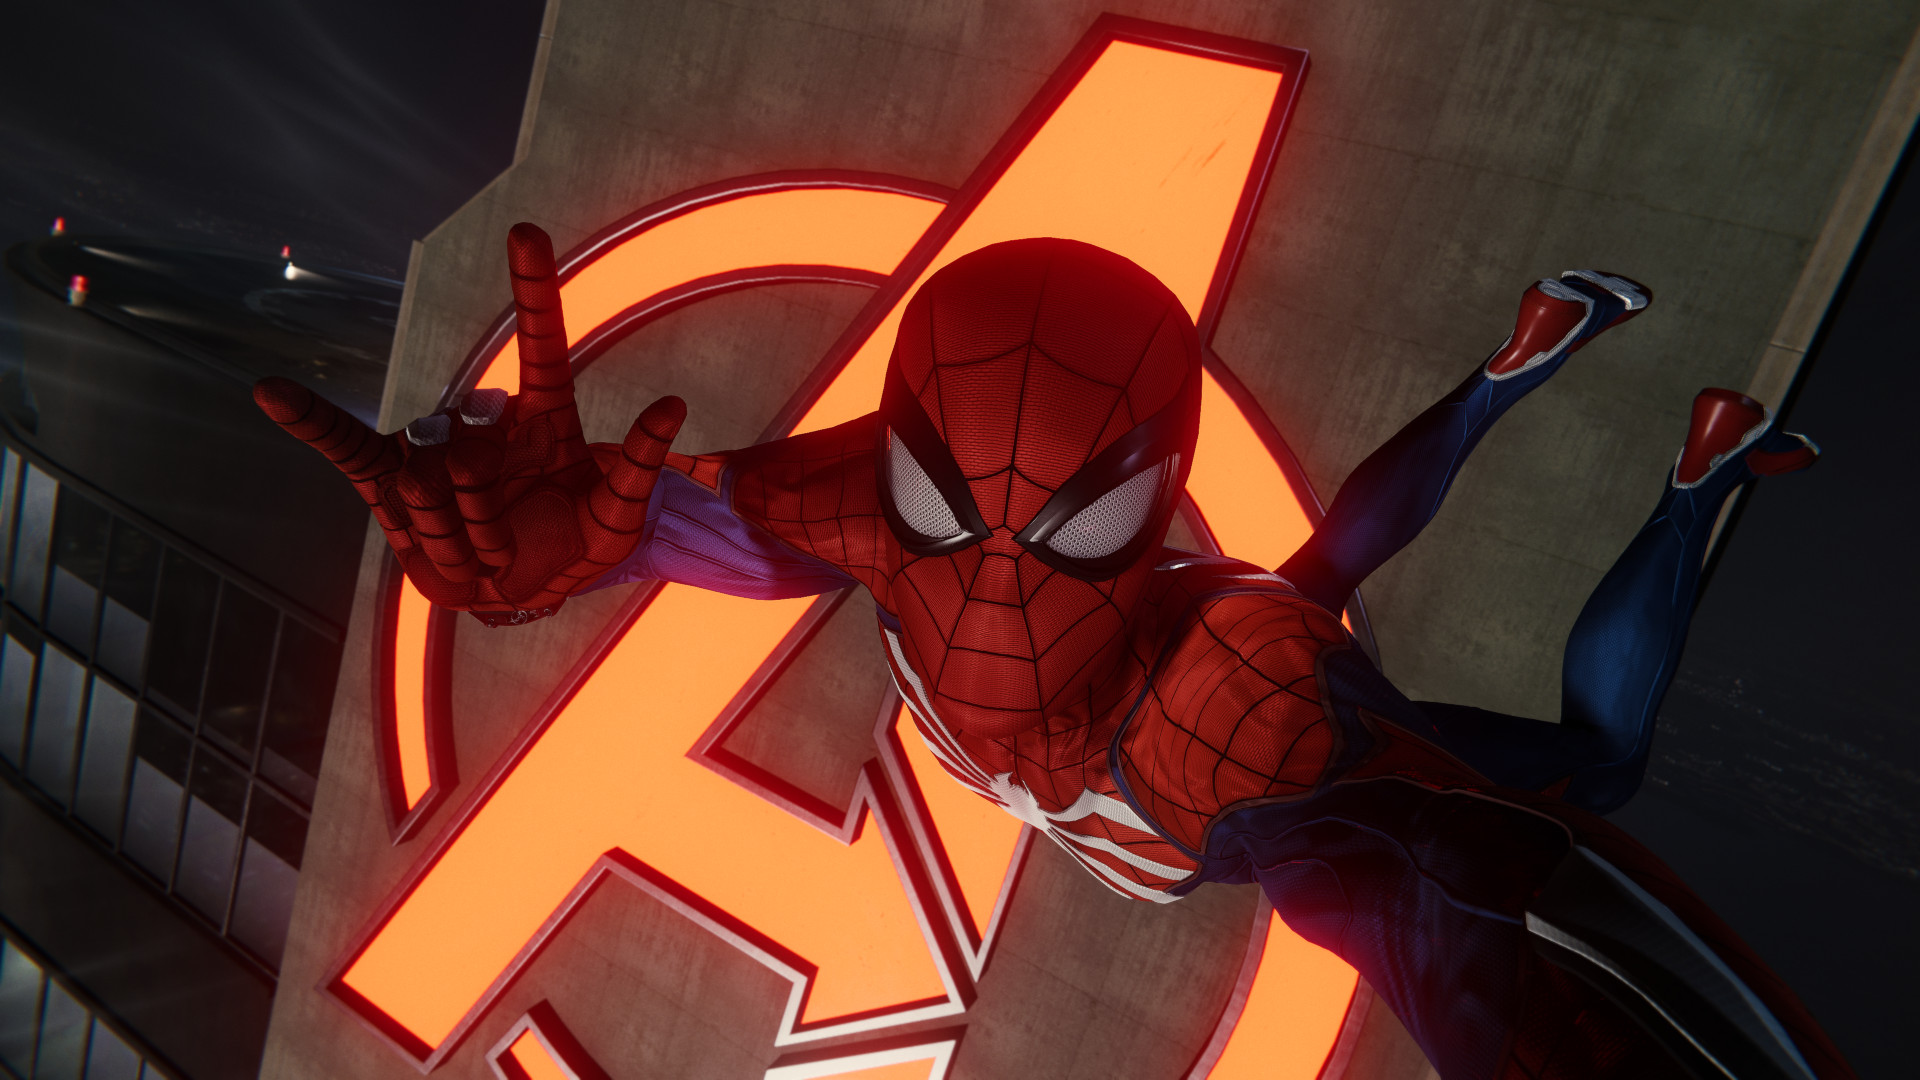 Marvel's Spider-Man Remastered PC review: A selfie of Spidey, giving us the horns with his right hand, against the neon glow of the Avengers Tower